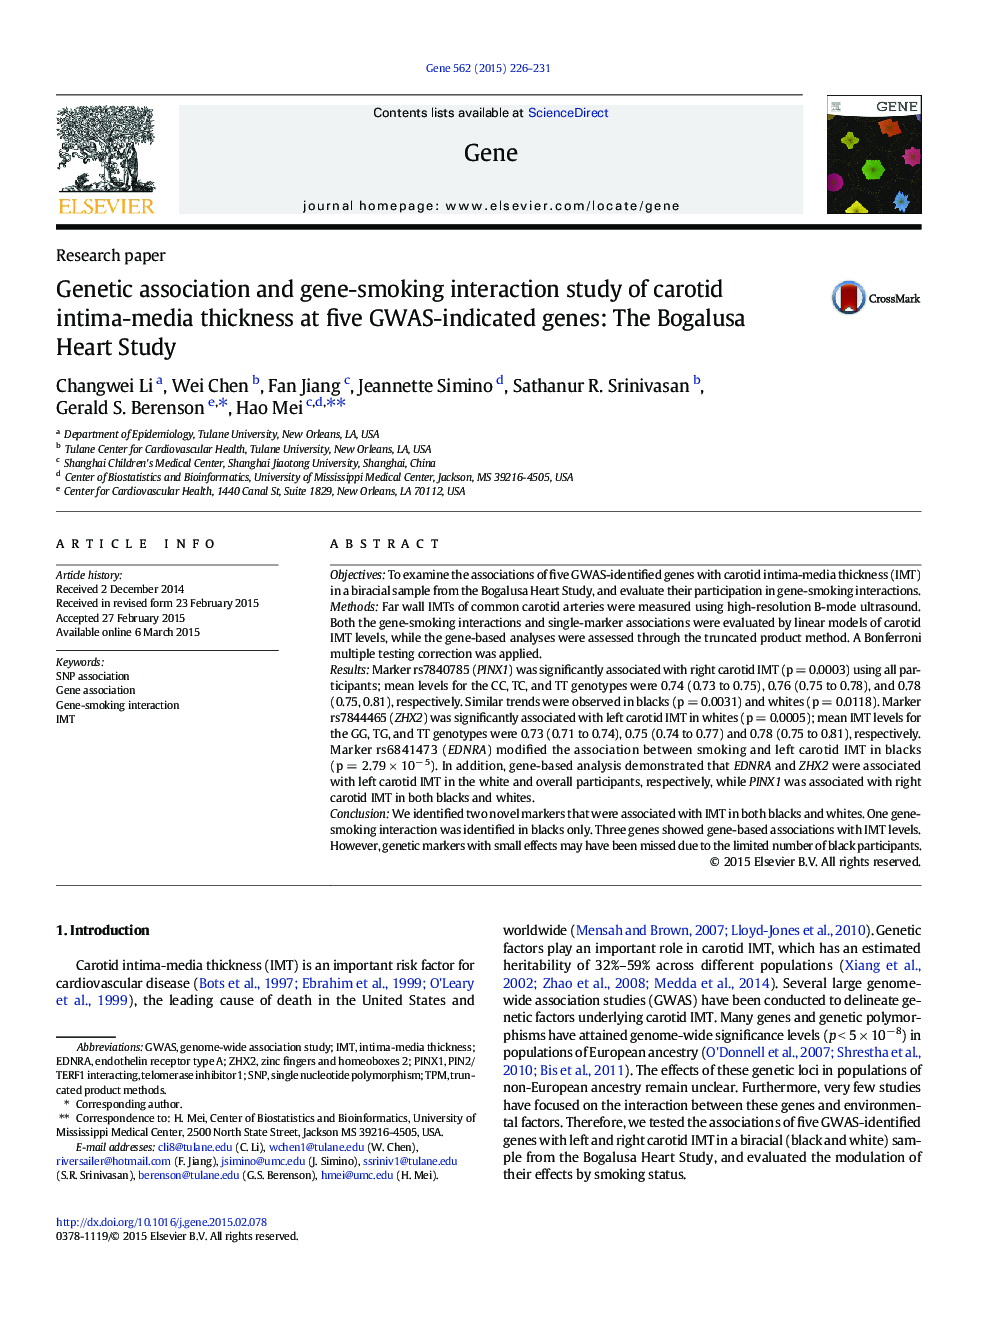 Genetic association and gene-smoking interaction study of carotid intima-media thickness at five GWAS-indicated genes: The Bogalusa Heart Study